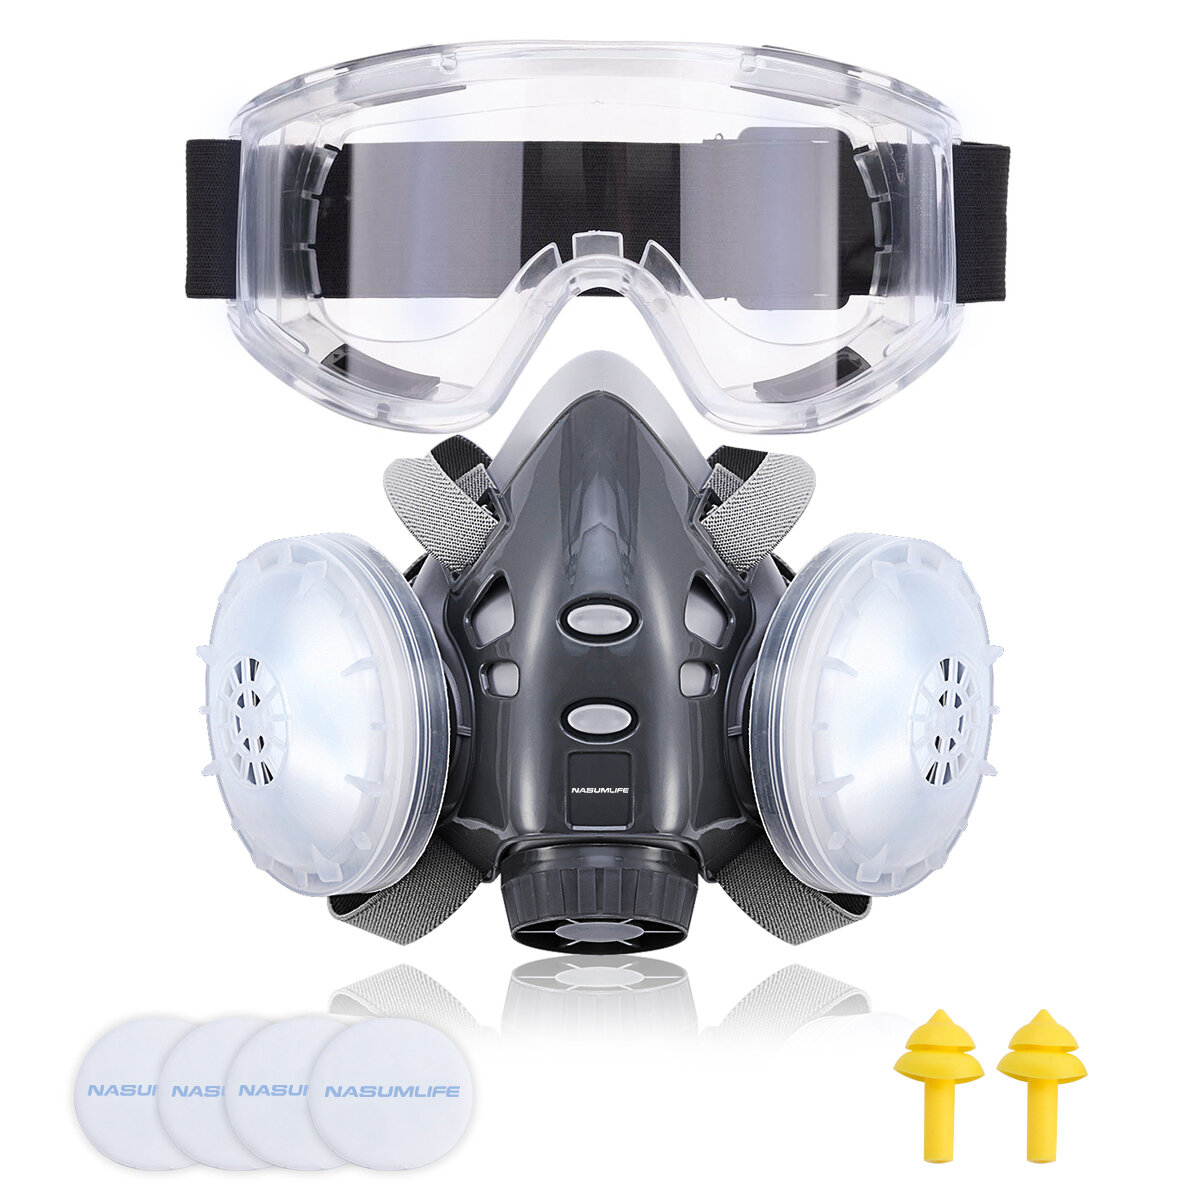 

308 Respiratory Face Cover Mask Reusable Glasses Goggle for Dust Protection Polishing with Ear Plugs Filters